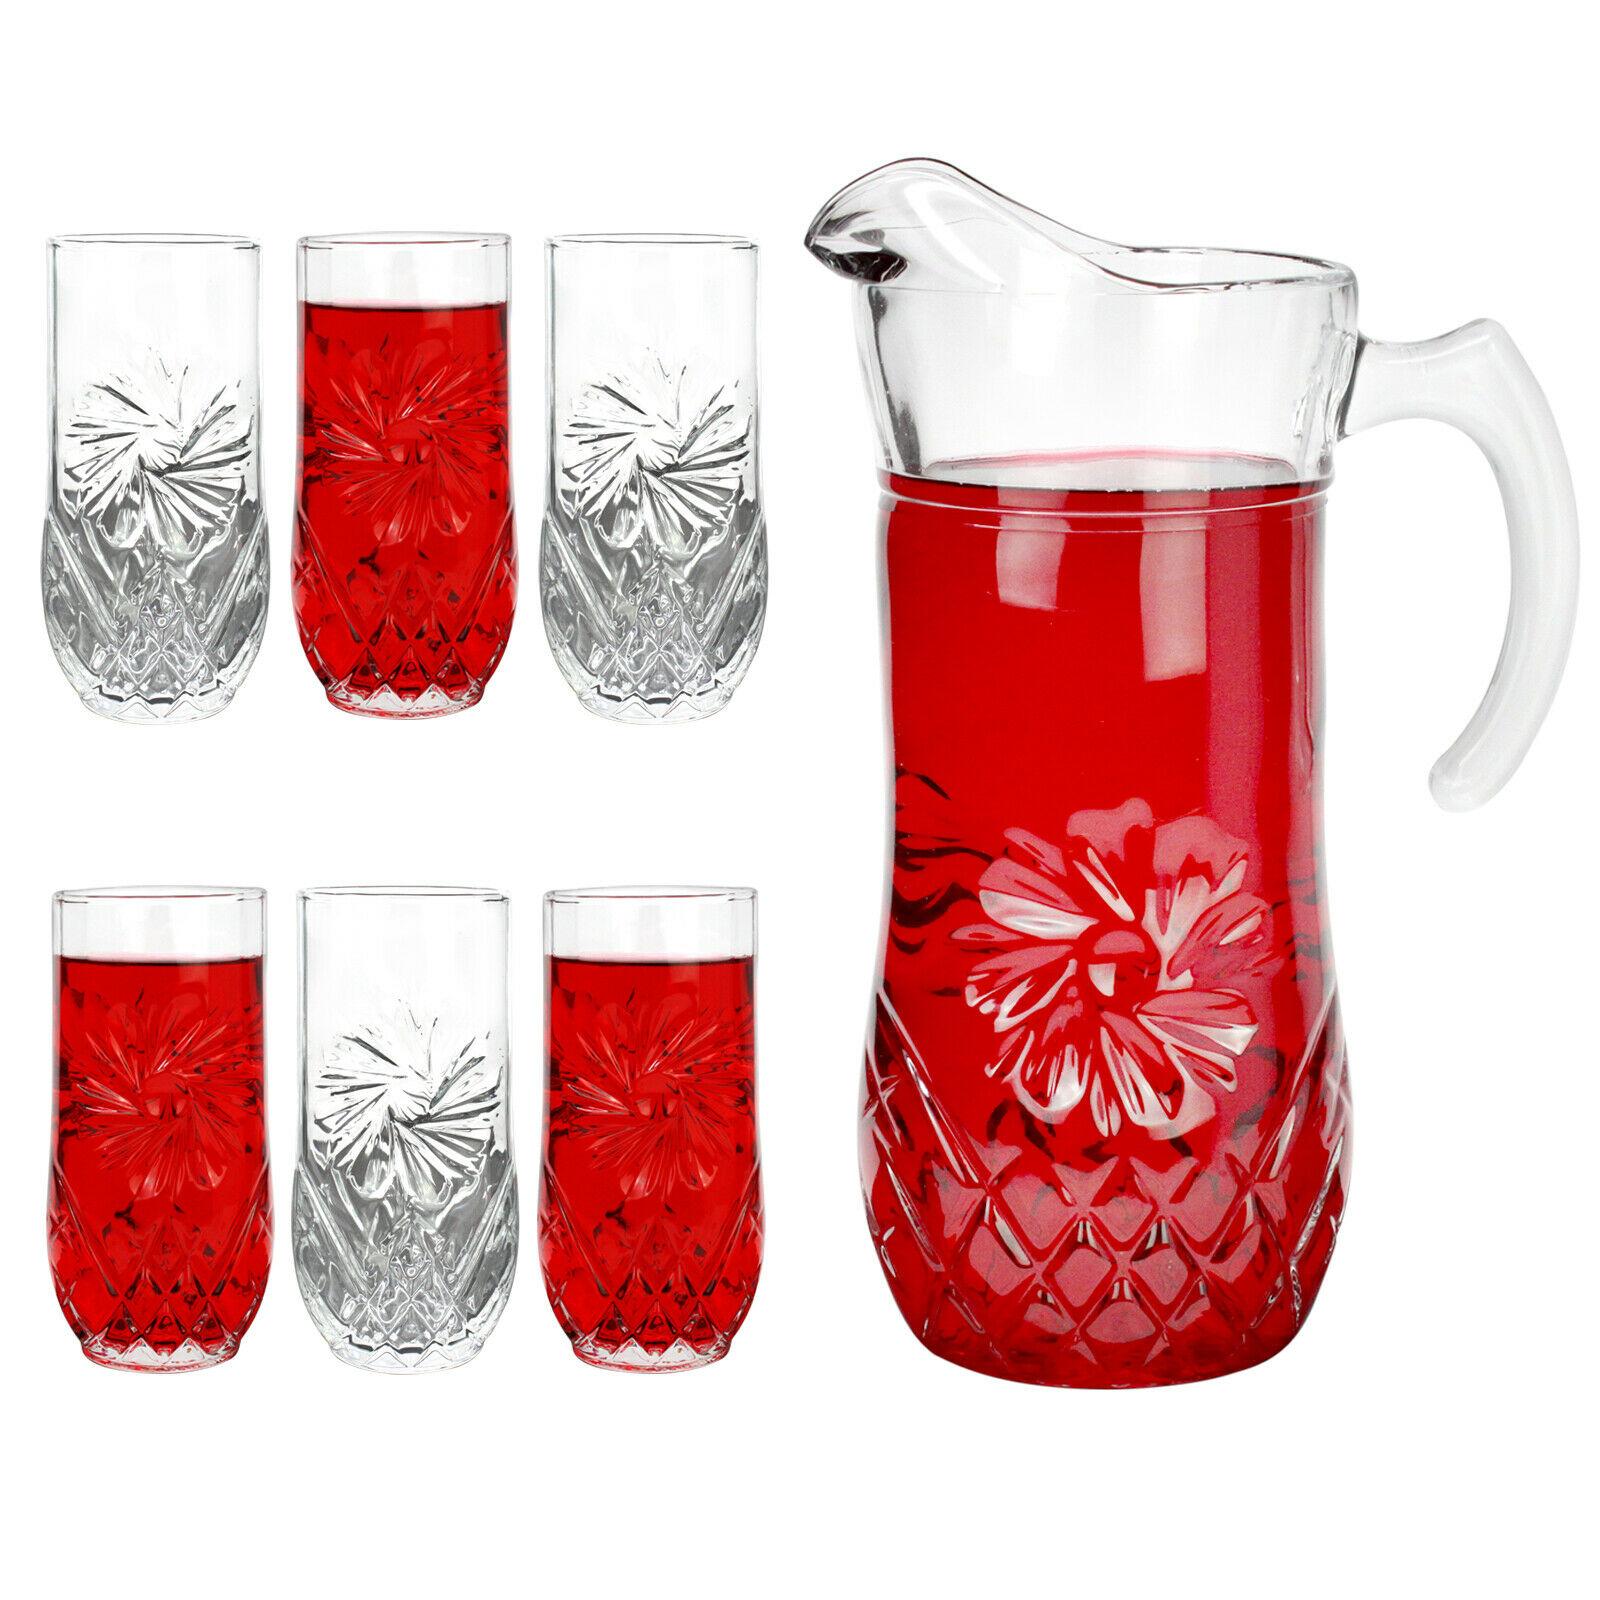 7 Piece Glassware Set Water 1L Jug and 6 Glasses Tumblers Pitcher Juice Jug with Lid